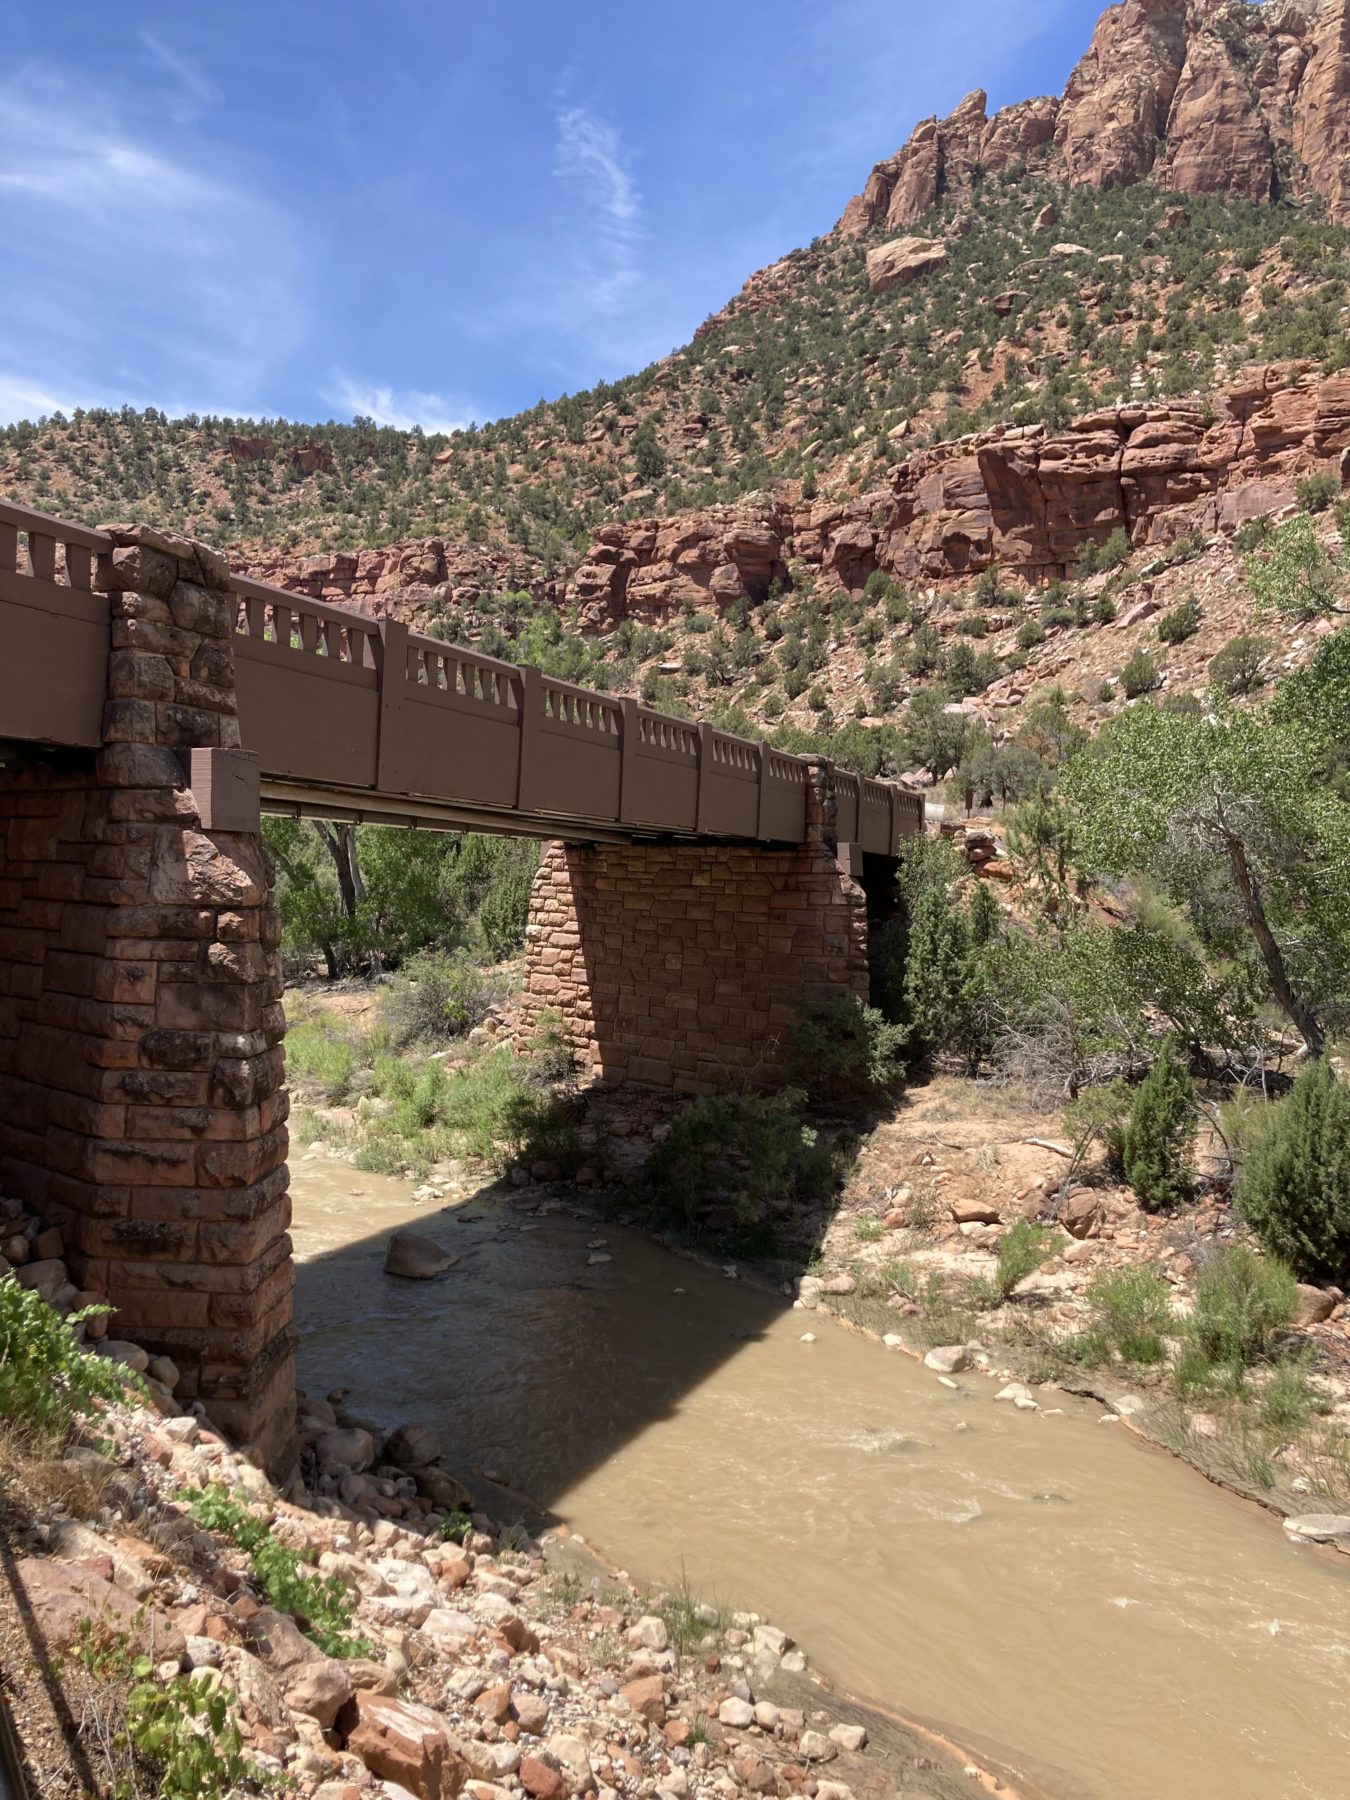 One day in Zion National Park bridge